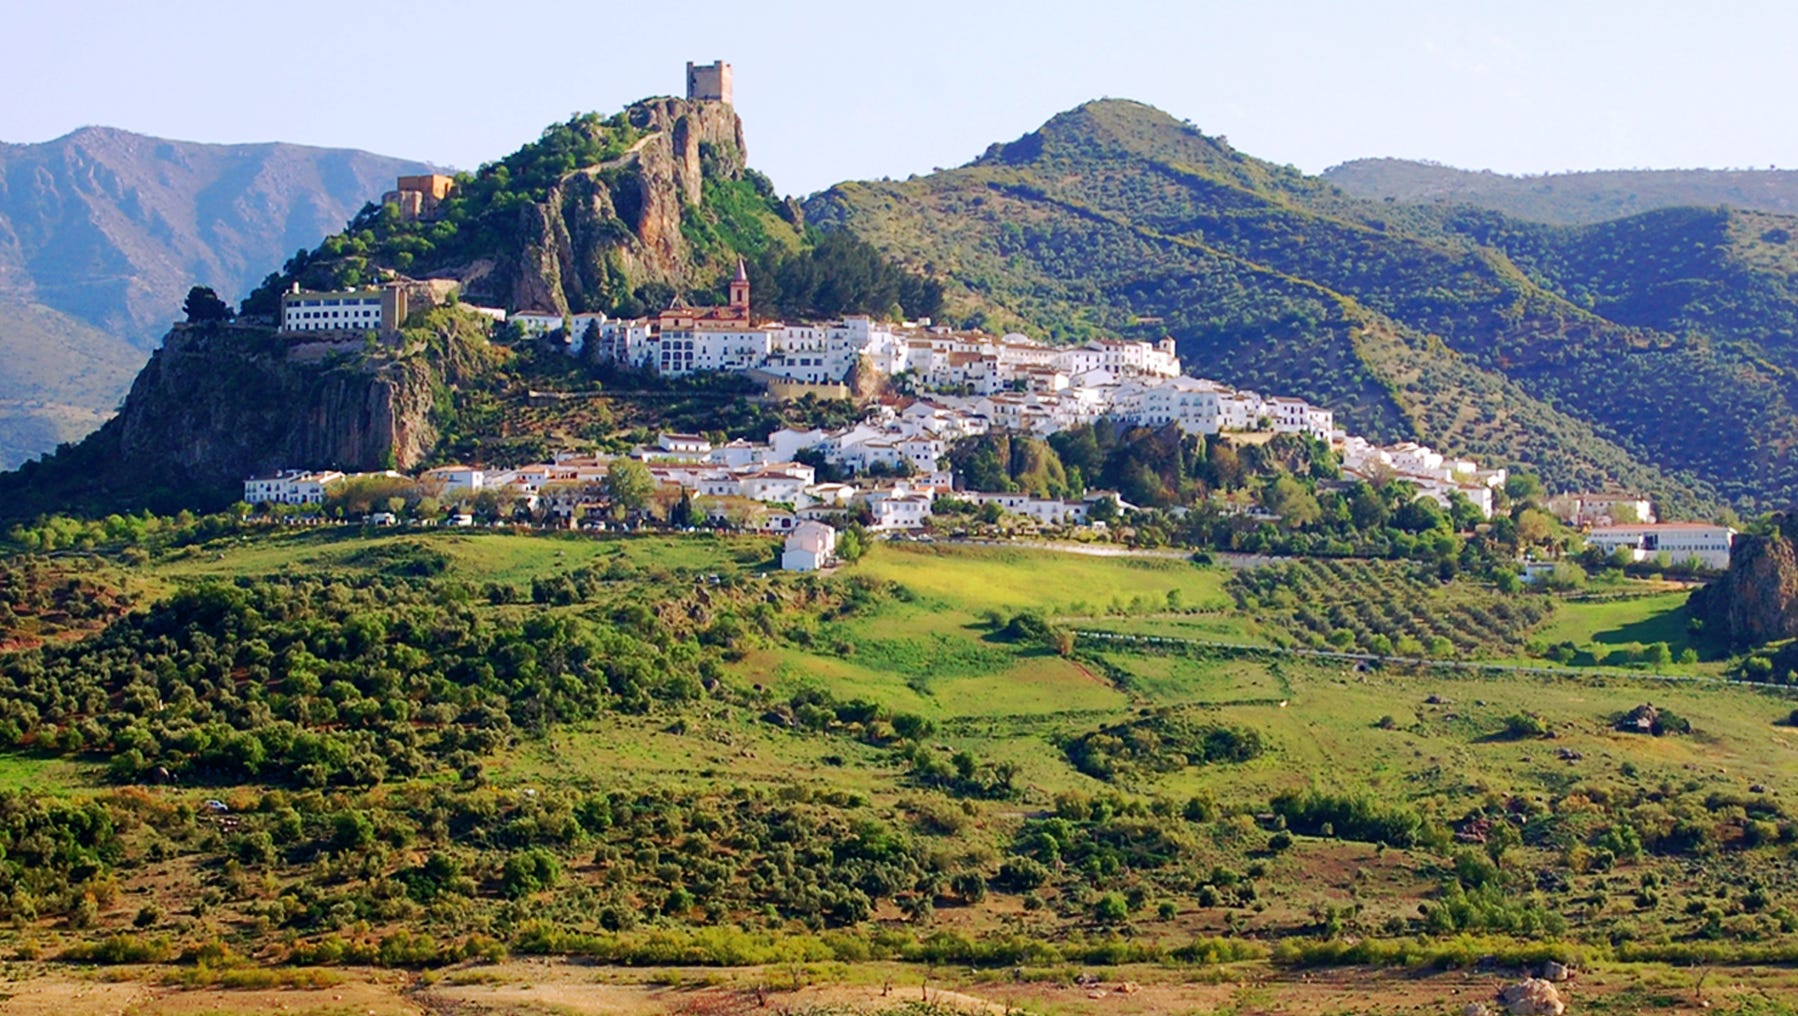 Rick Steves: A guide to the hill towns of Andalucía, Spain